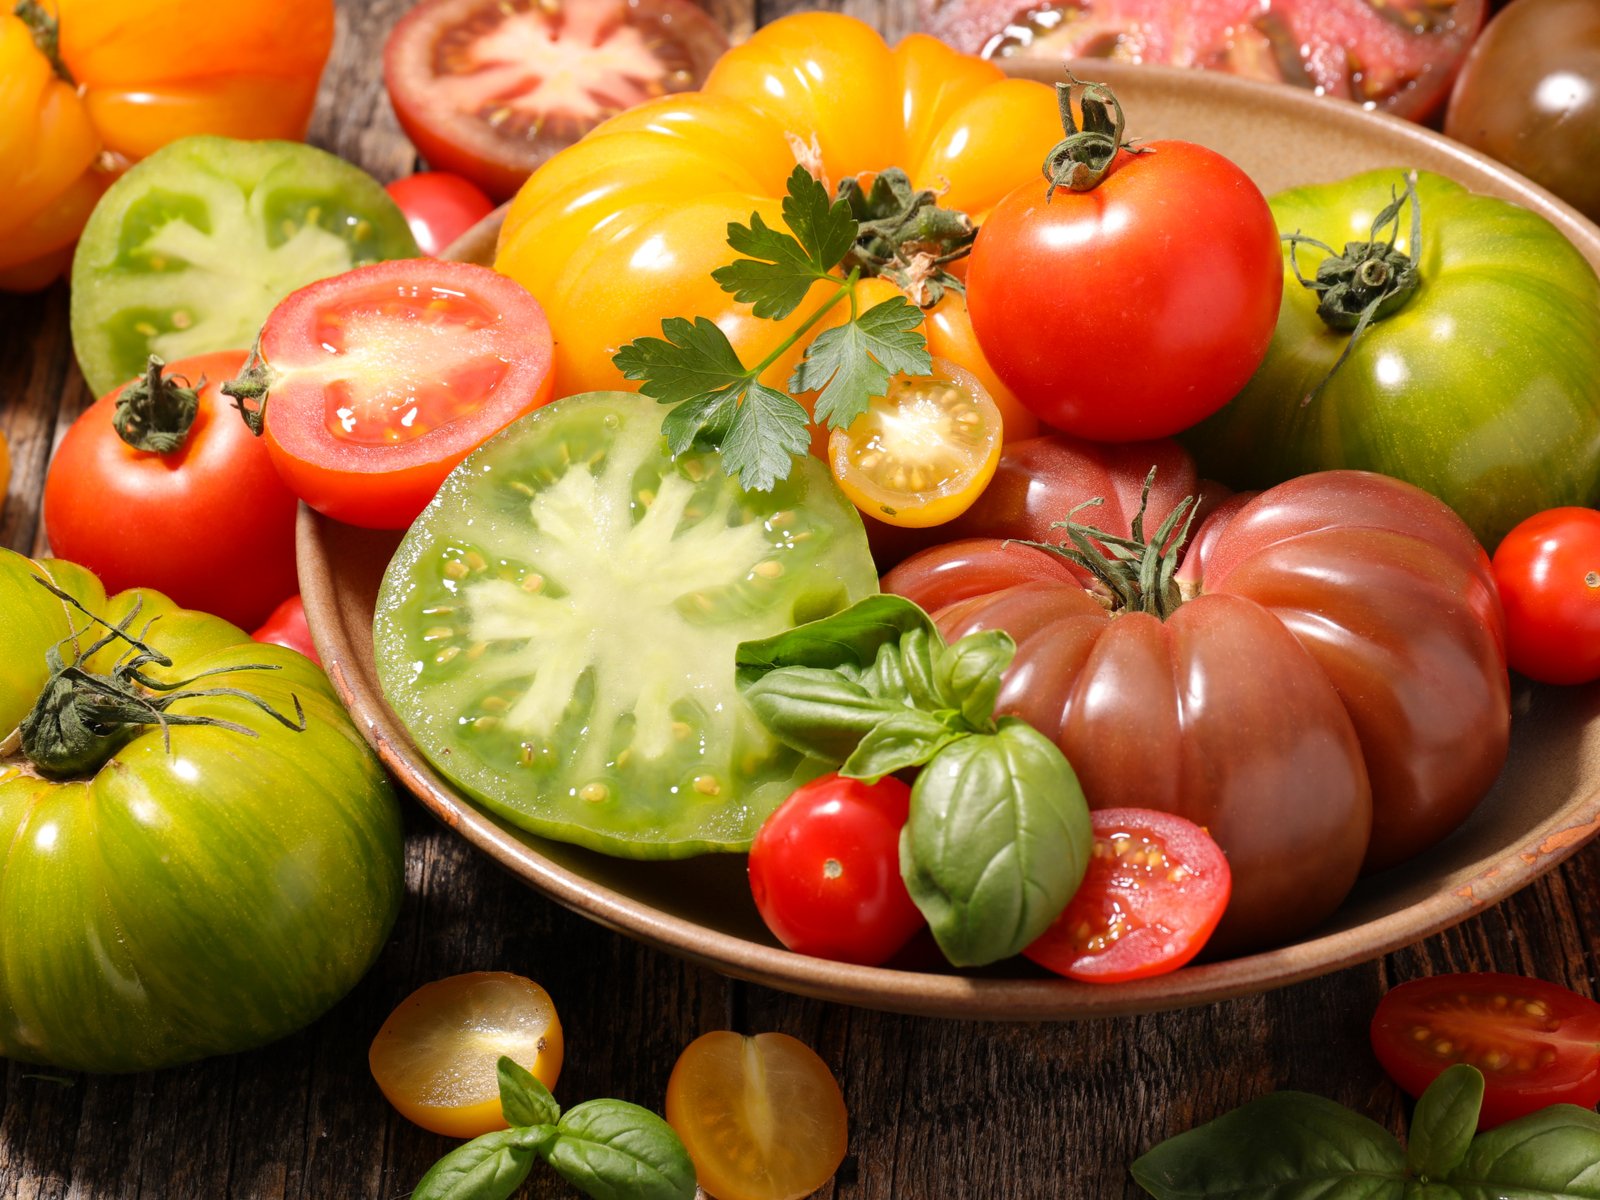 There are more than 10,000 tomato varieties.